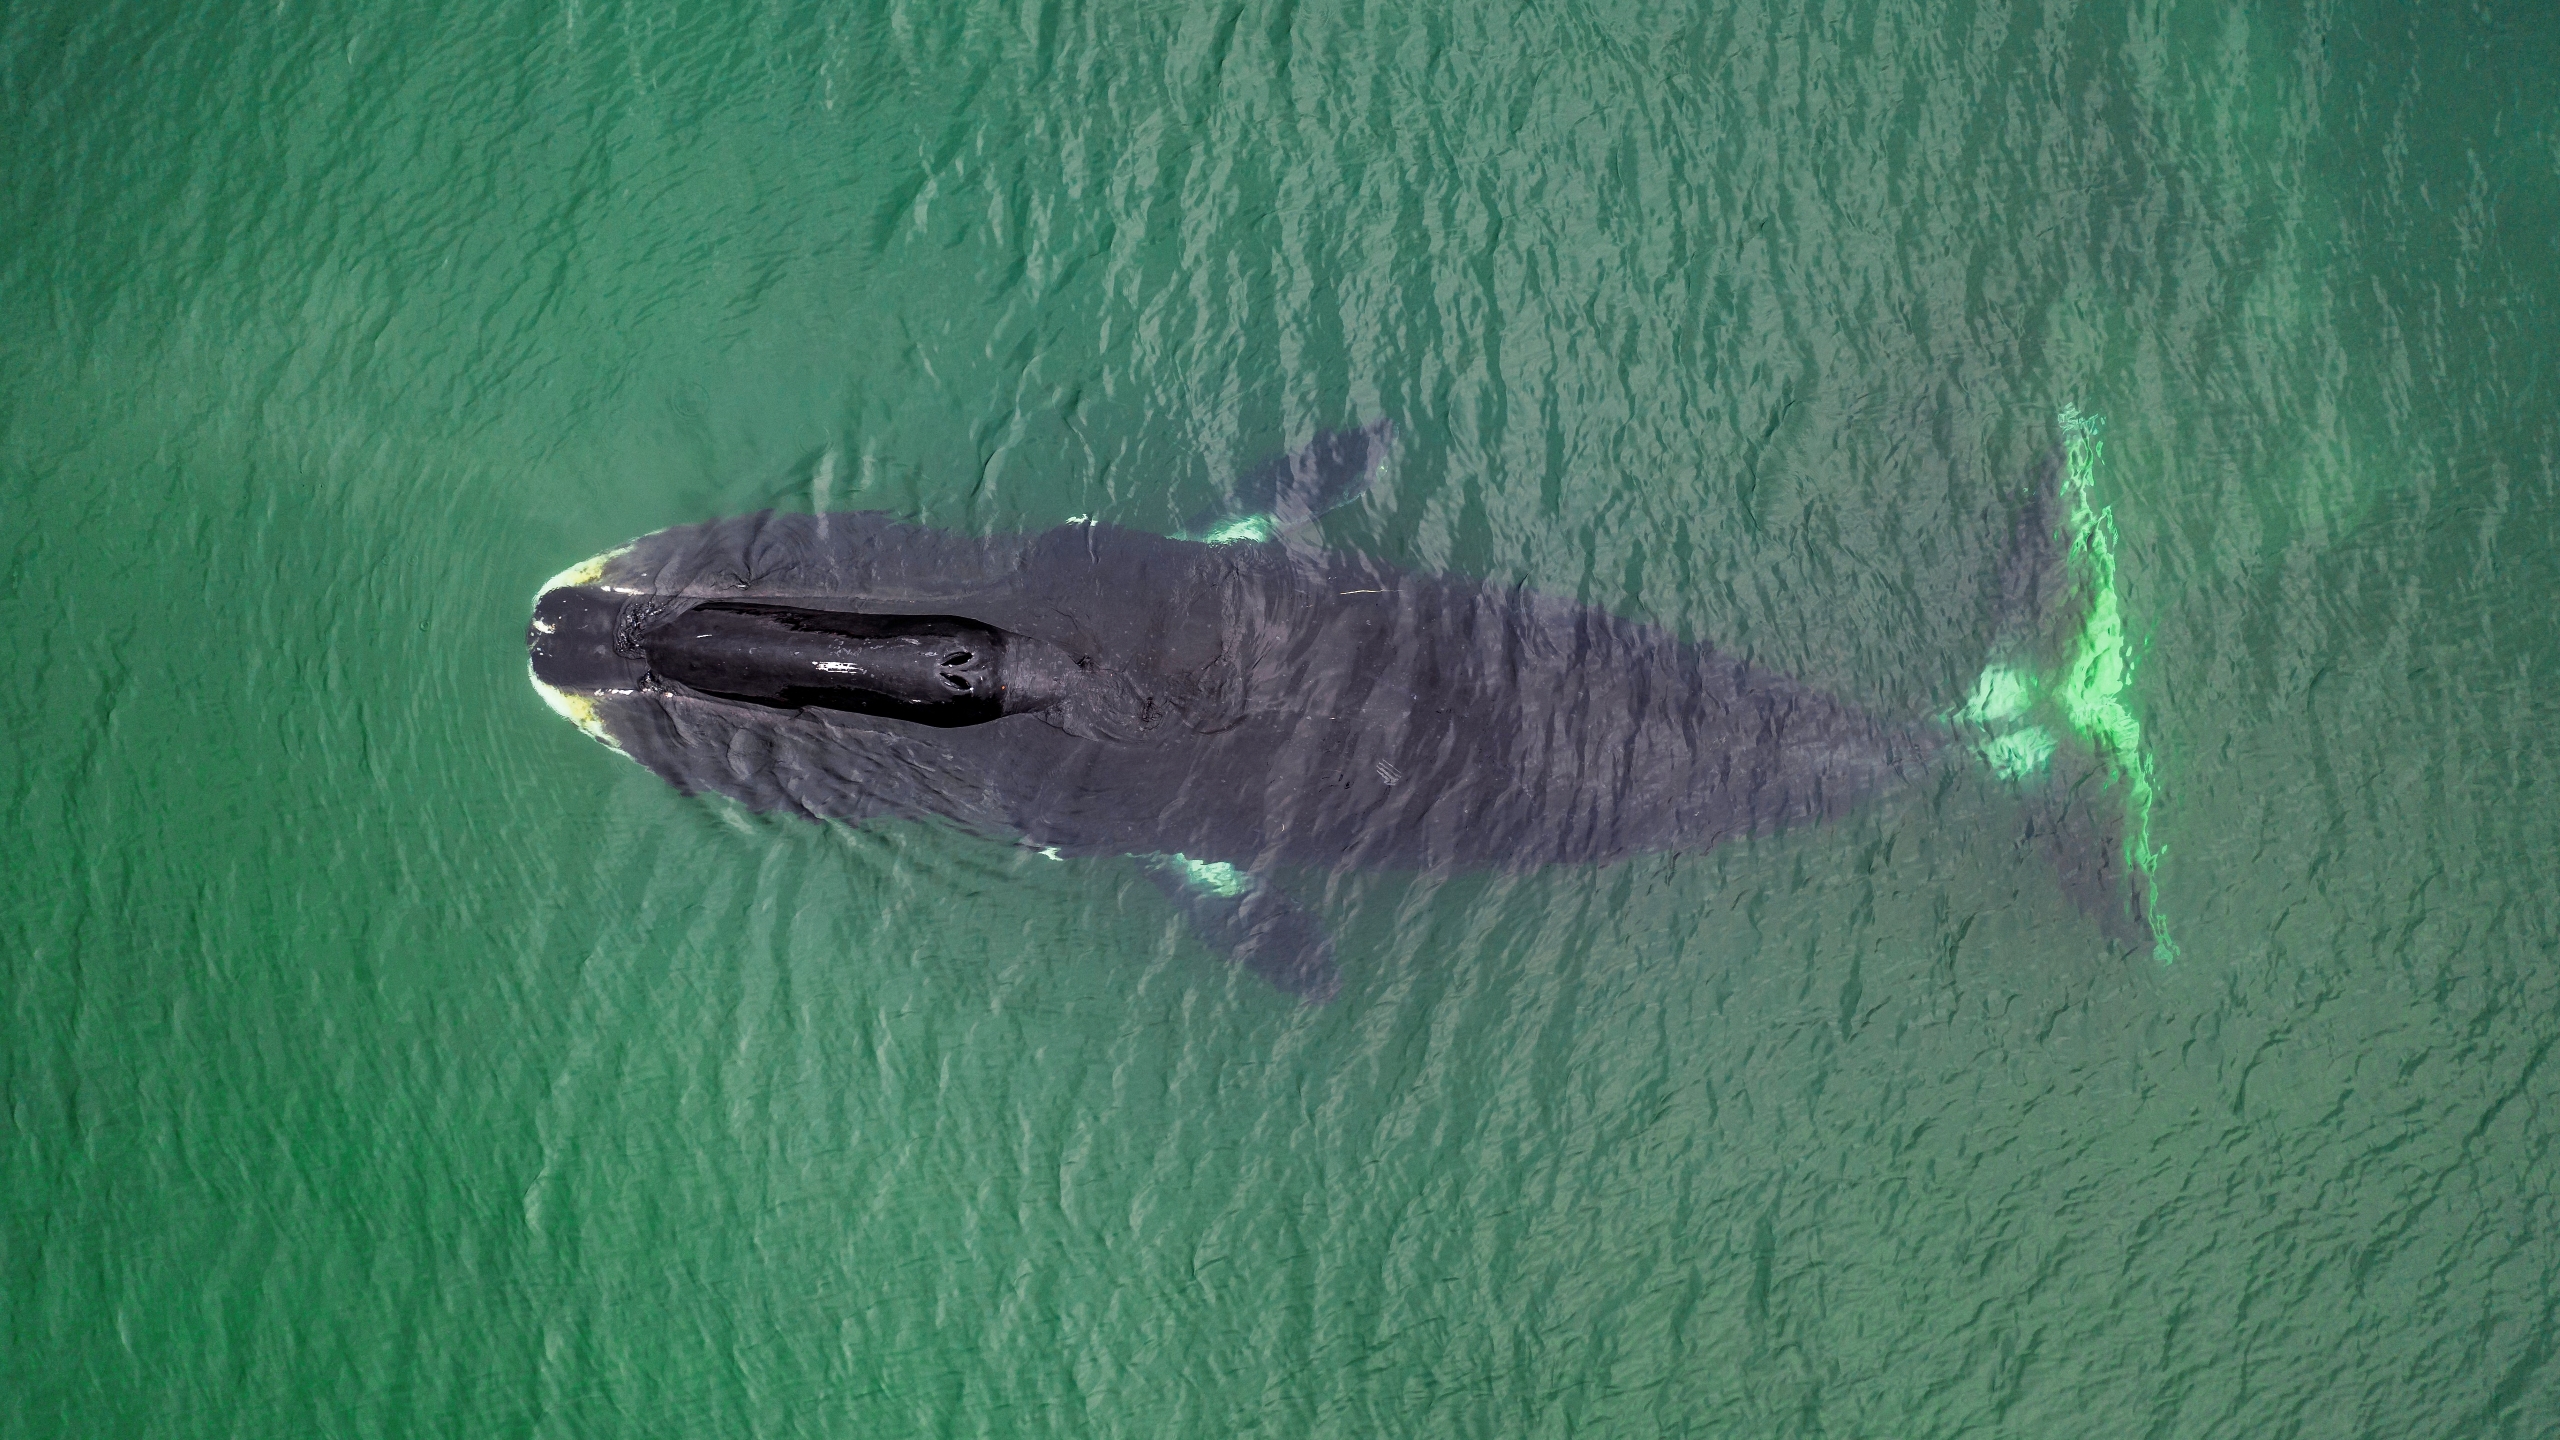 Aerial photo of a bowhead whale in shallow water in the Sea of Okhotsk in Russia.